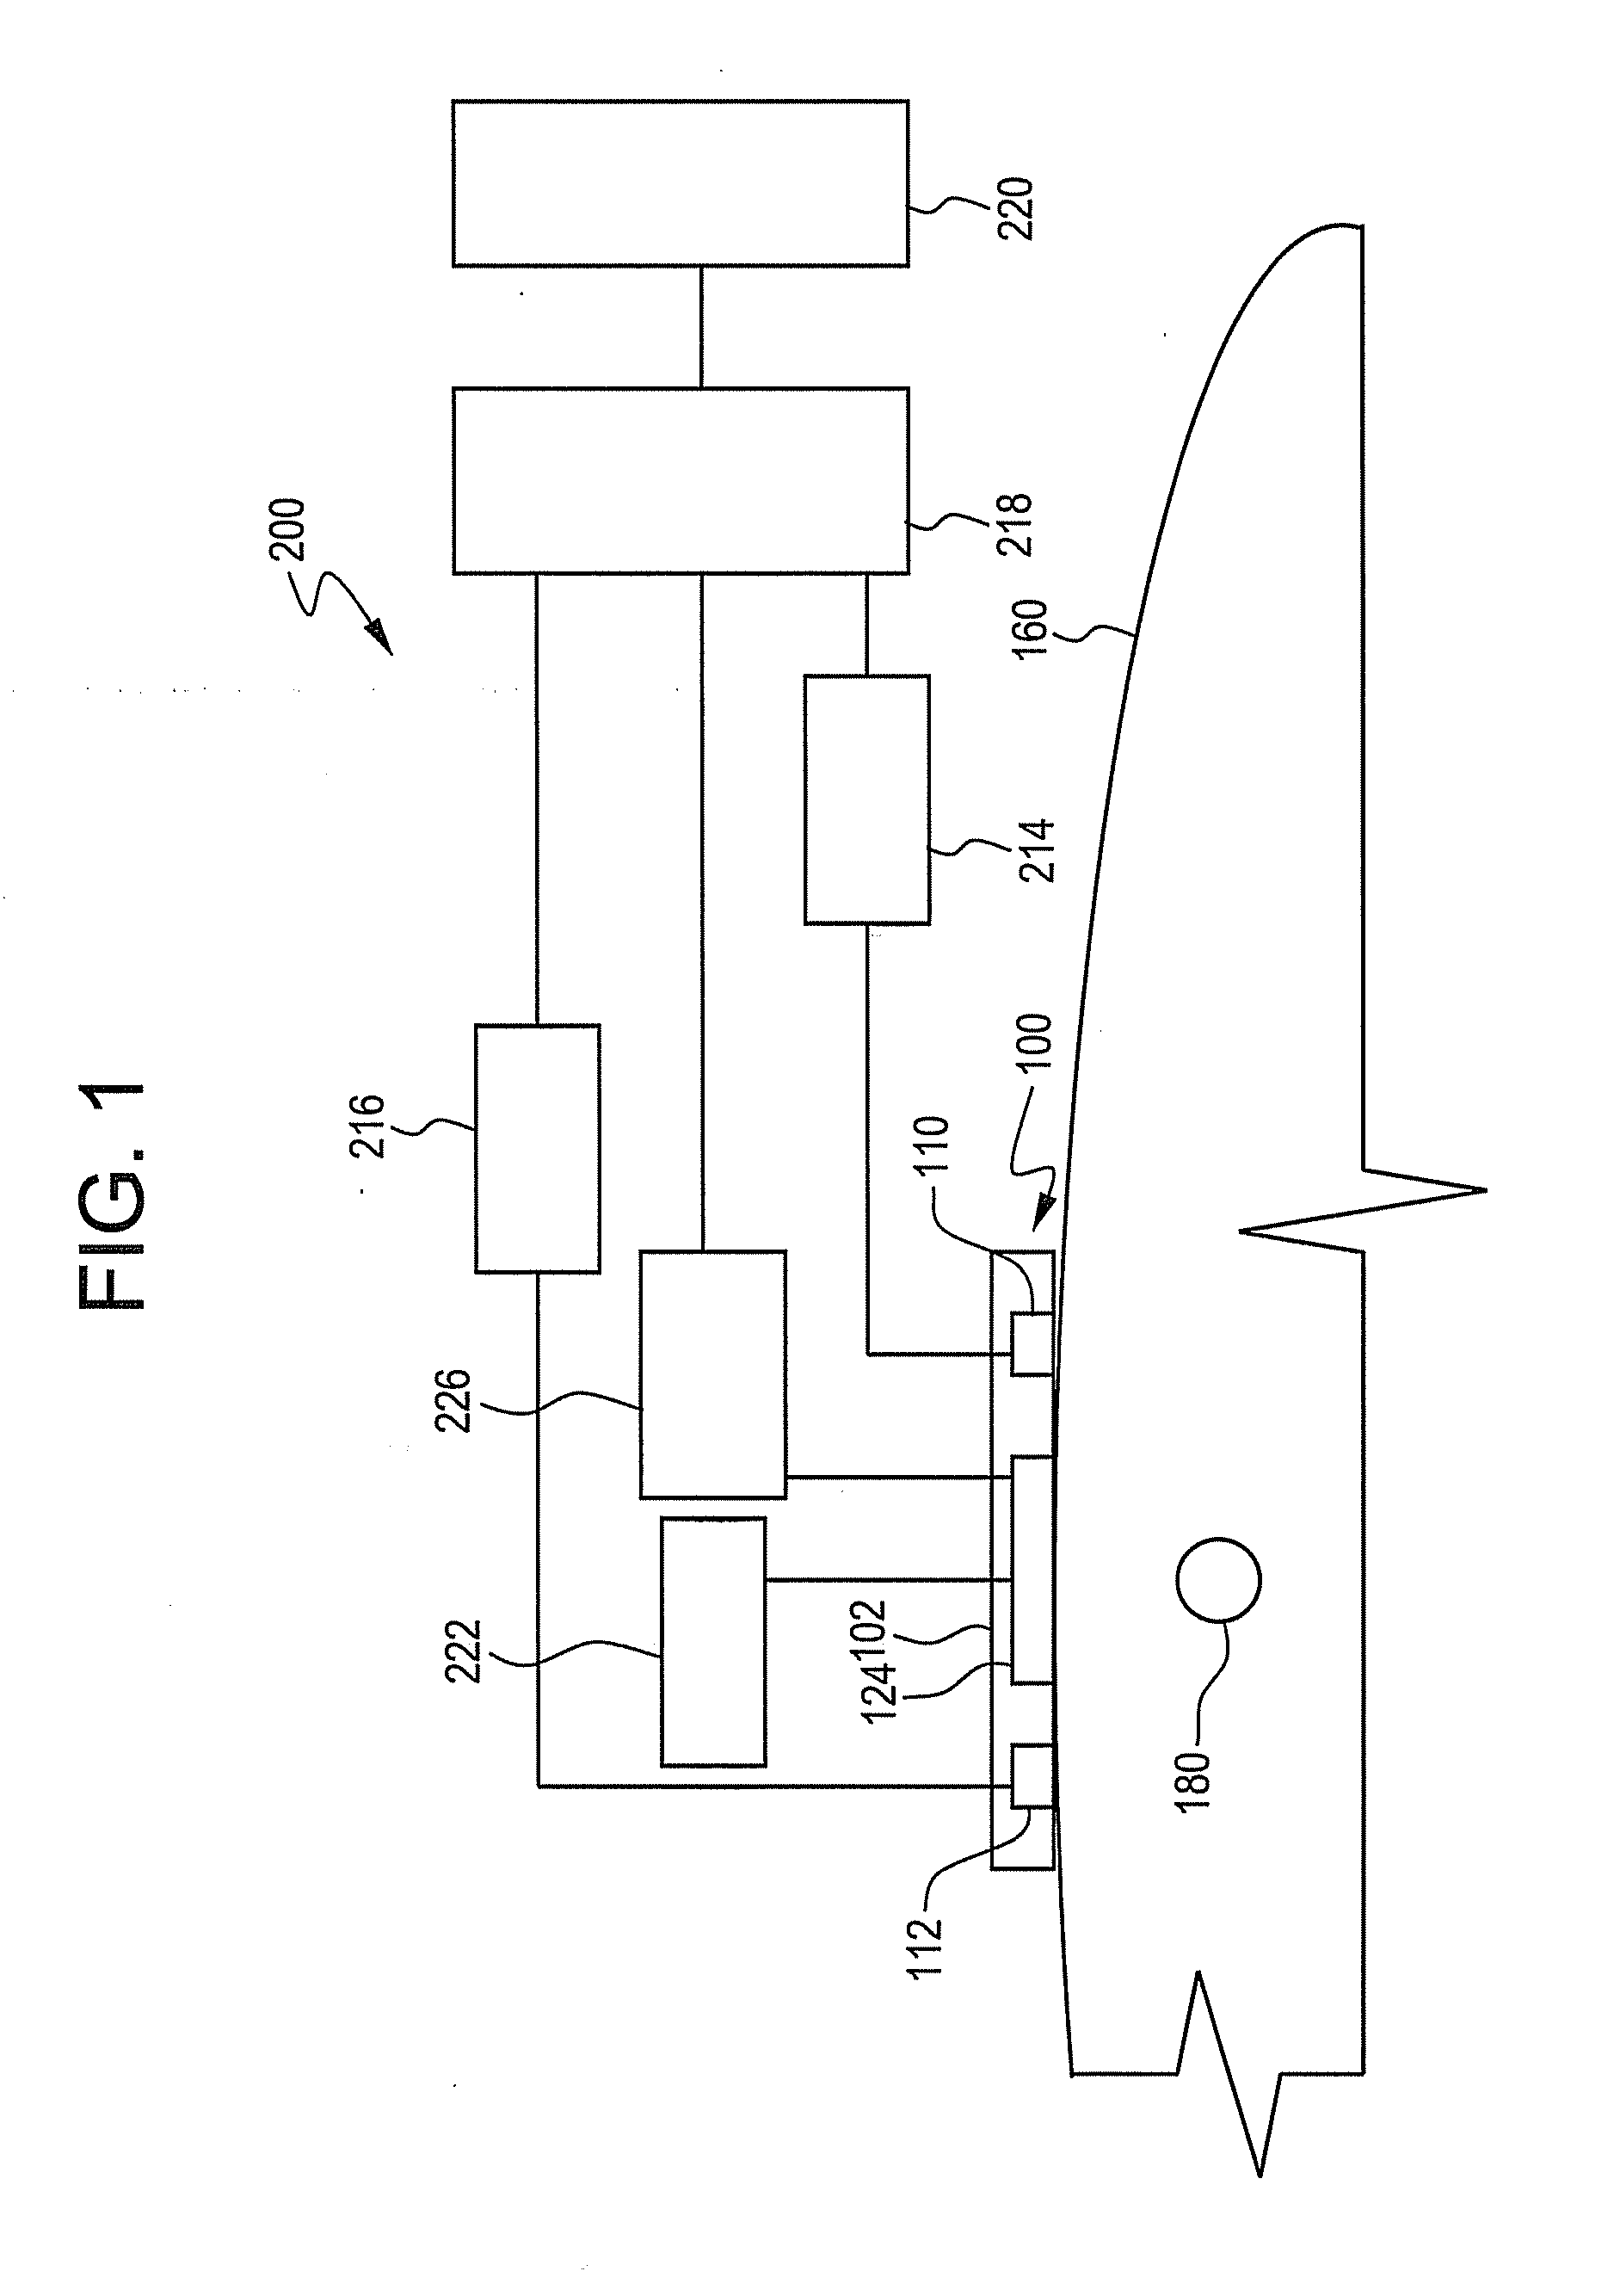 Method and apparatus for medical imaging using near-infrared optical tomography combined with photoacoustic and ultrasound guidance